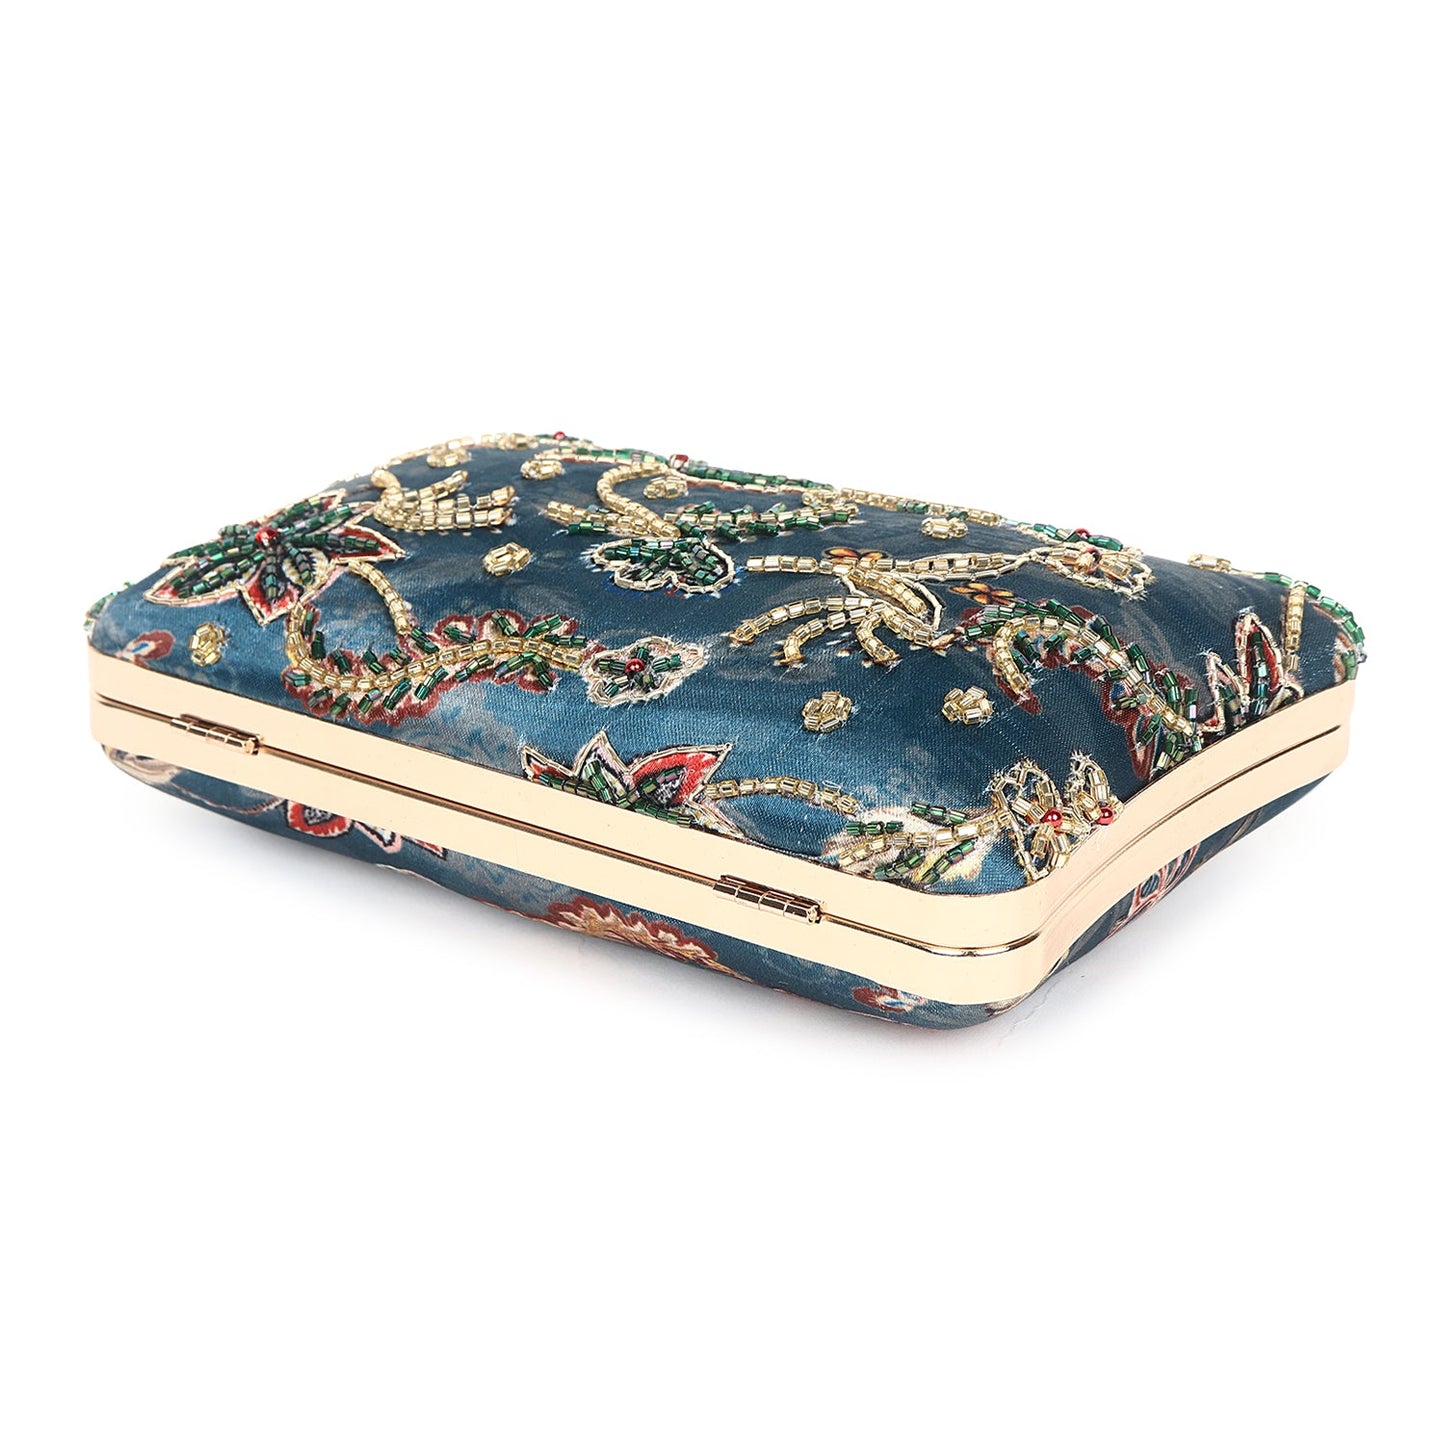 Printed embroidered clutch bag